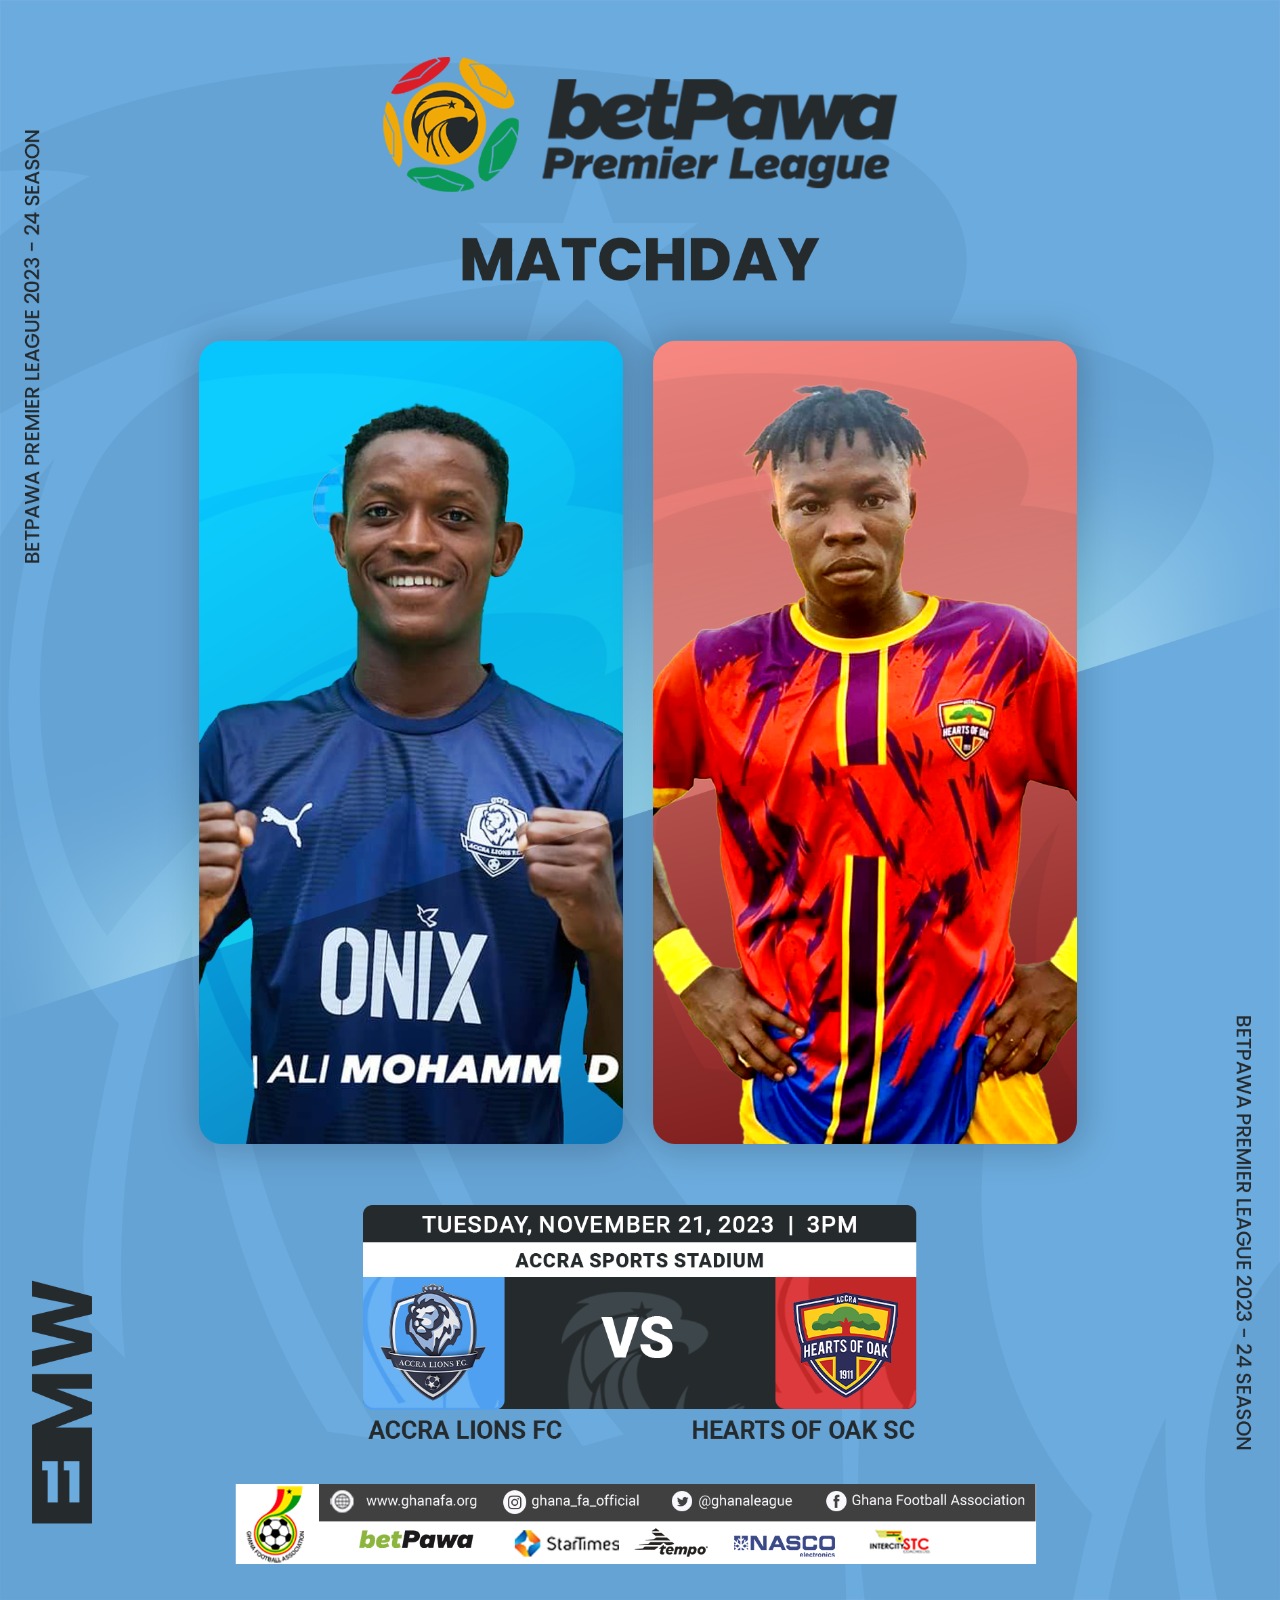 2023/24 GPL: Accra Lions face off with Hearts of Oak on Tuesday